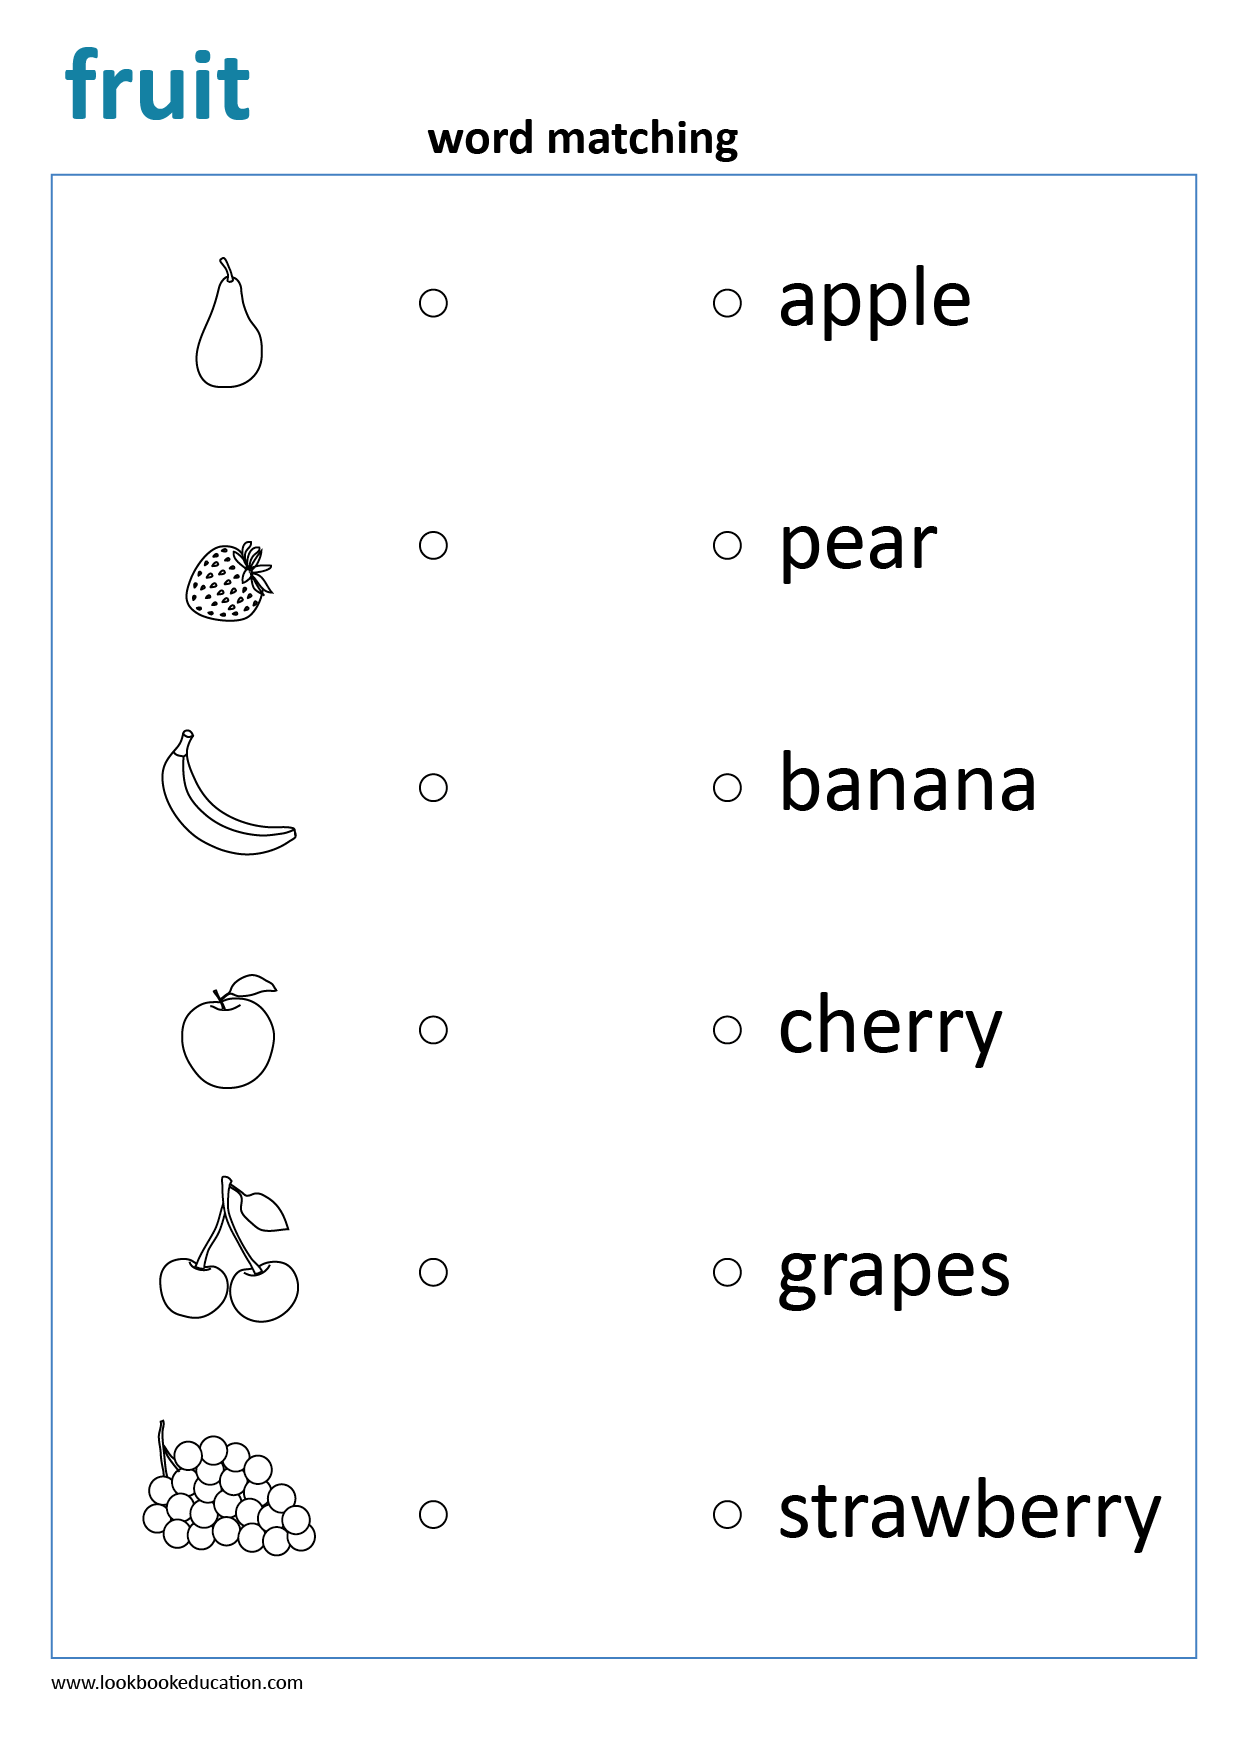 Worksheet Read and Match Fruit - LookbookEducation.com